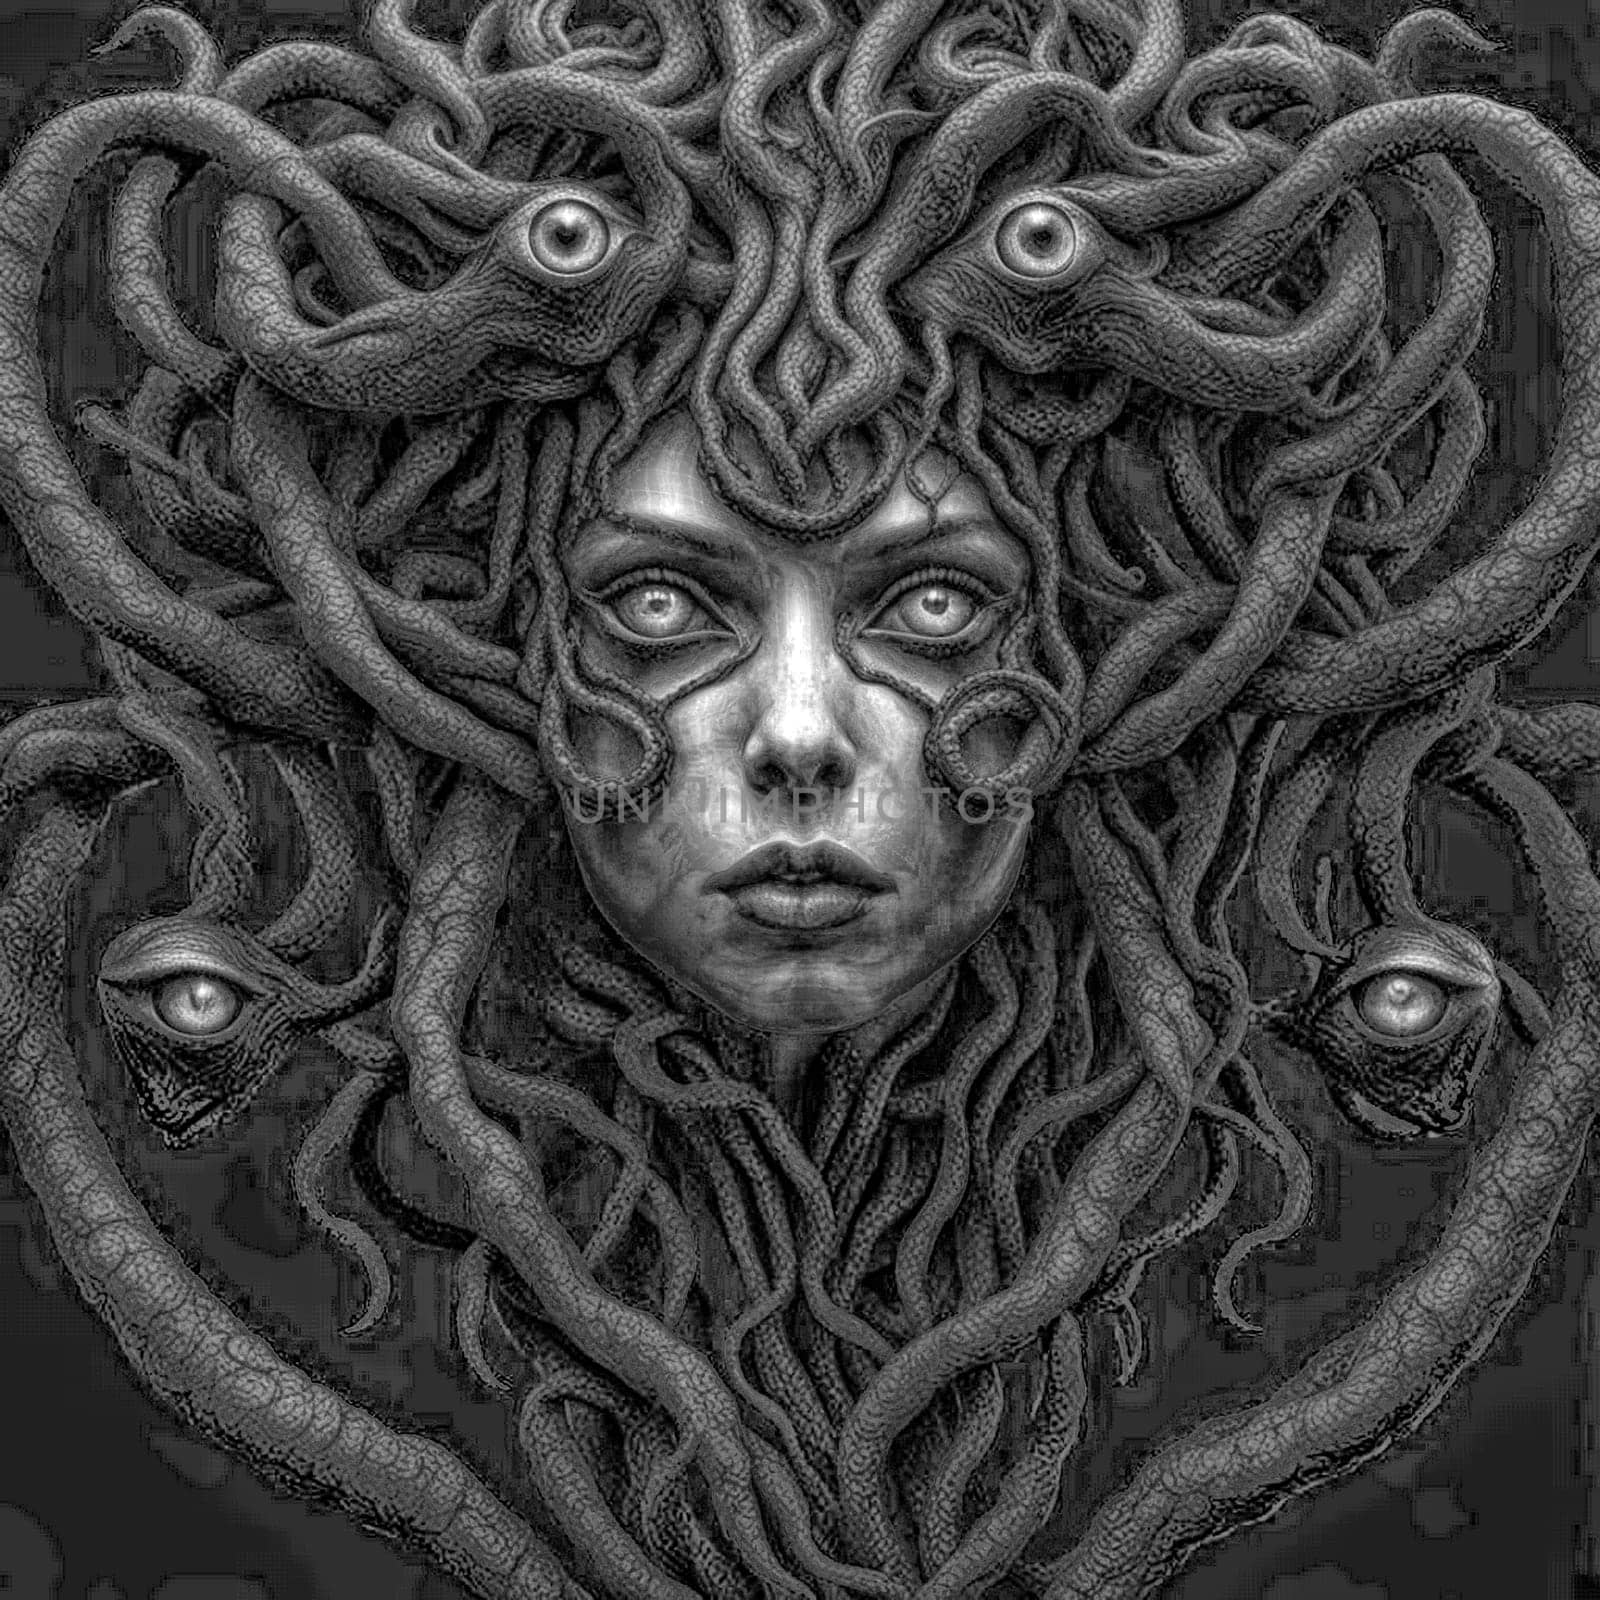 AI generated portrait of a Medusa like woman face in monochrome against a black background.